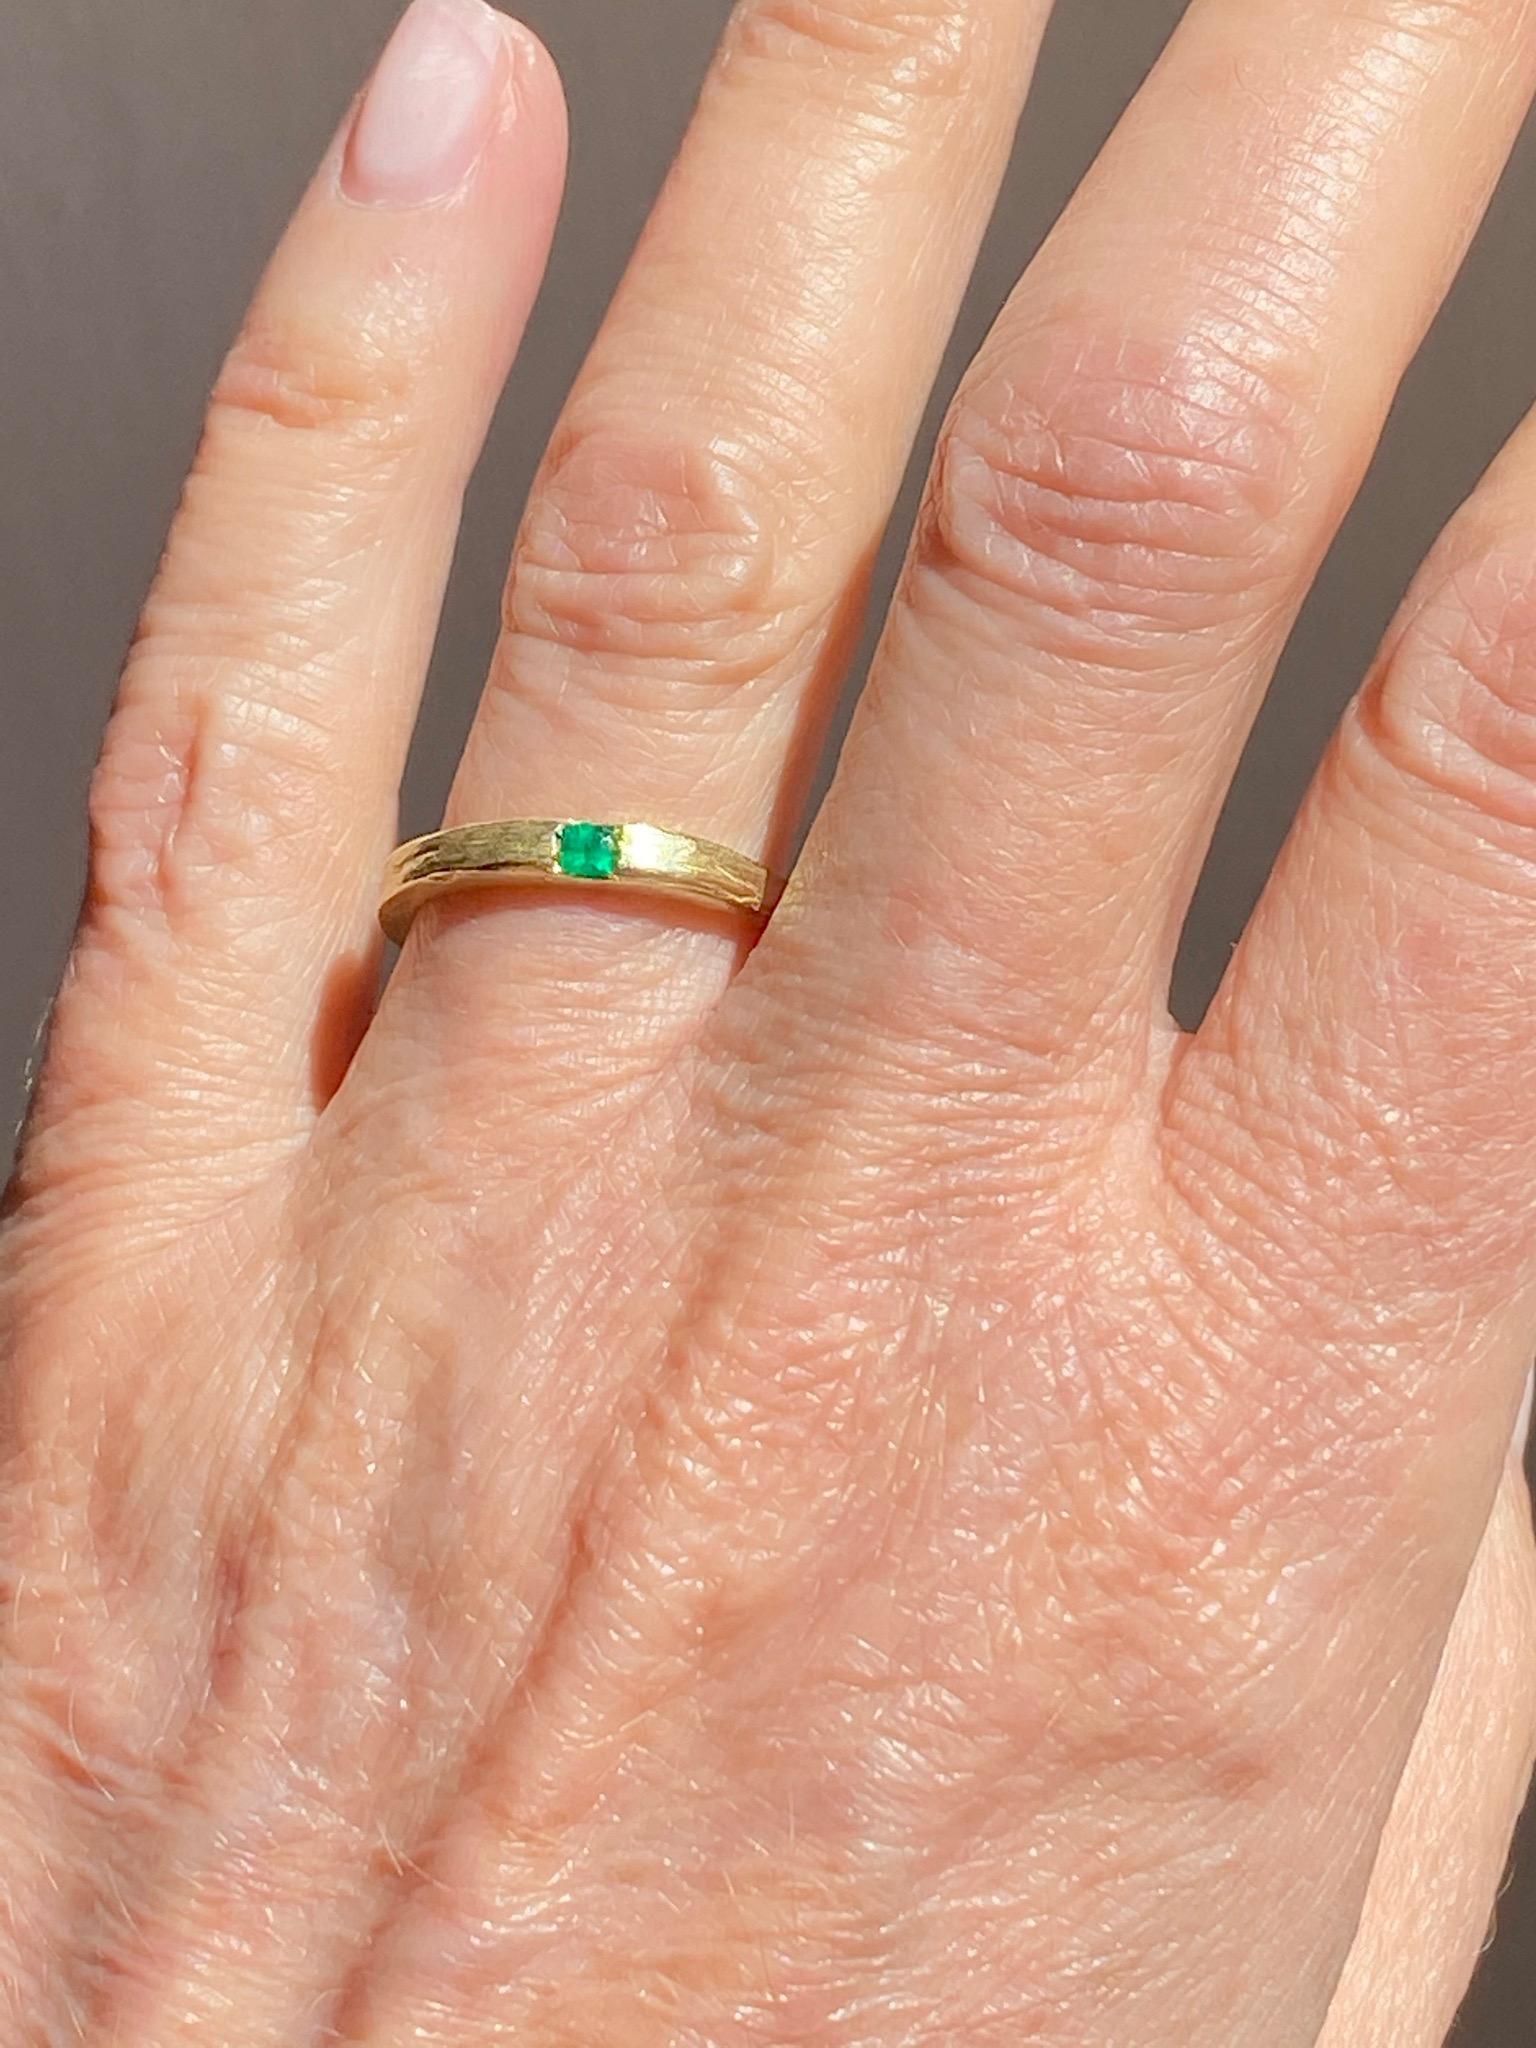 Rossella Ugolini Design Collection  Unisex Green Emerald Band ring handcrafted in 18 karat Yellow Gold and enriched with Emerald. The gold processing recalls the organic structure of wood and makes this ring a special band. Can be worn also as an